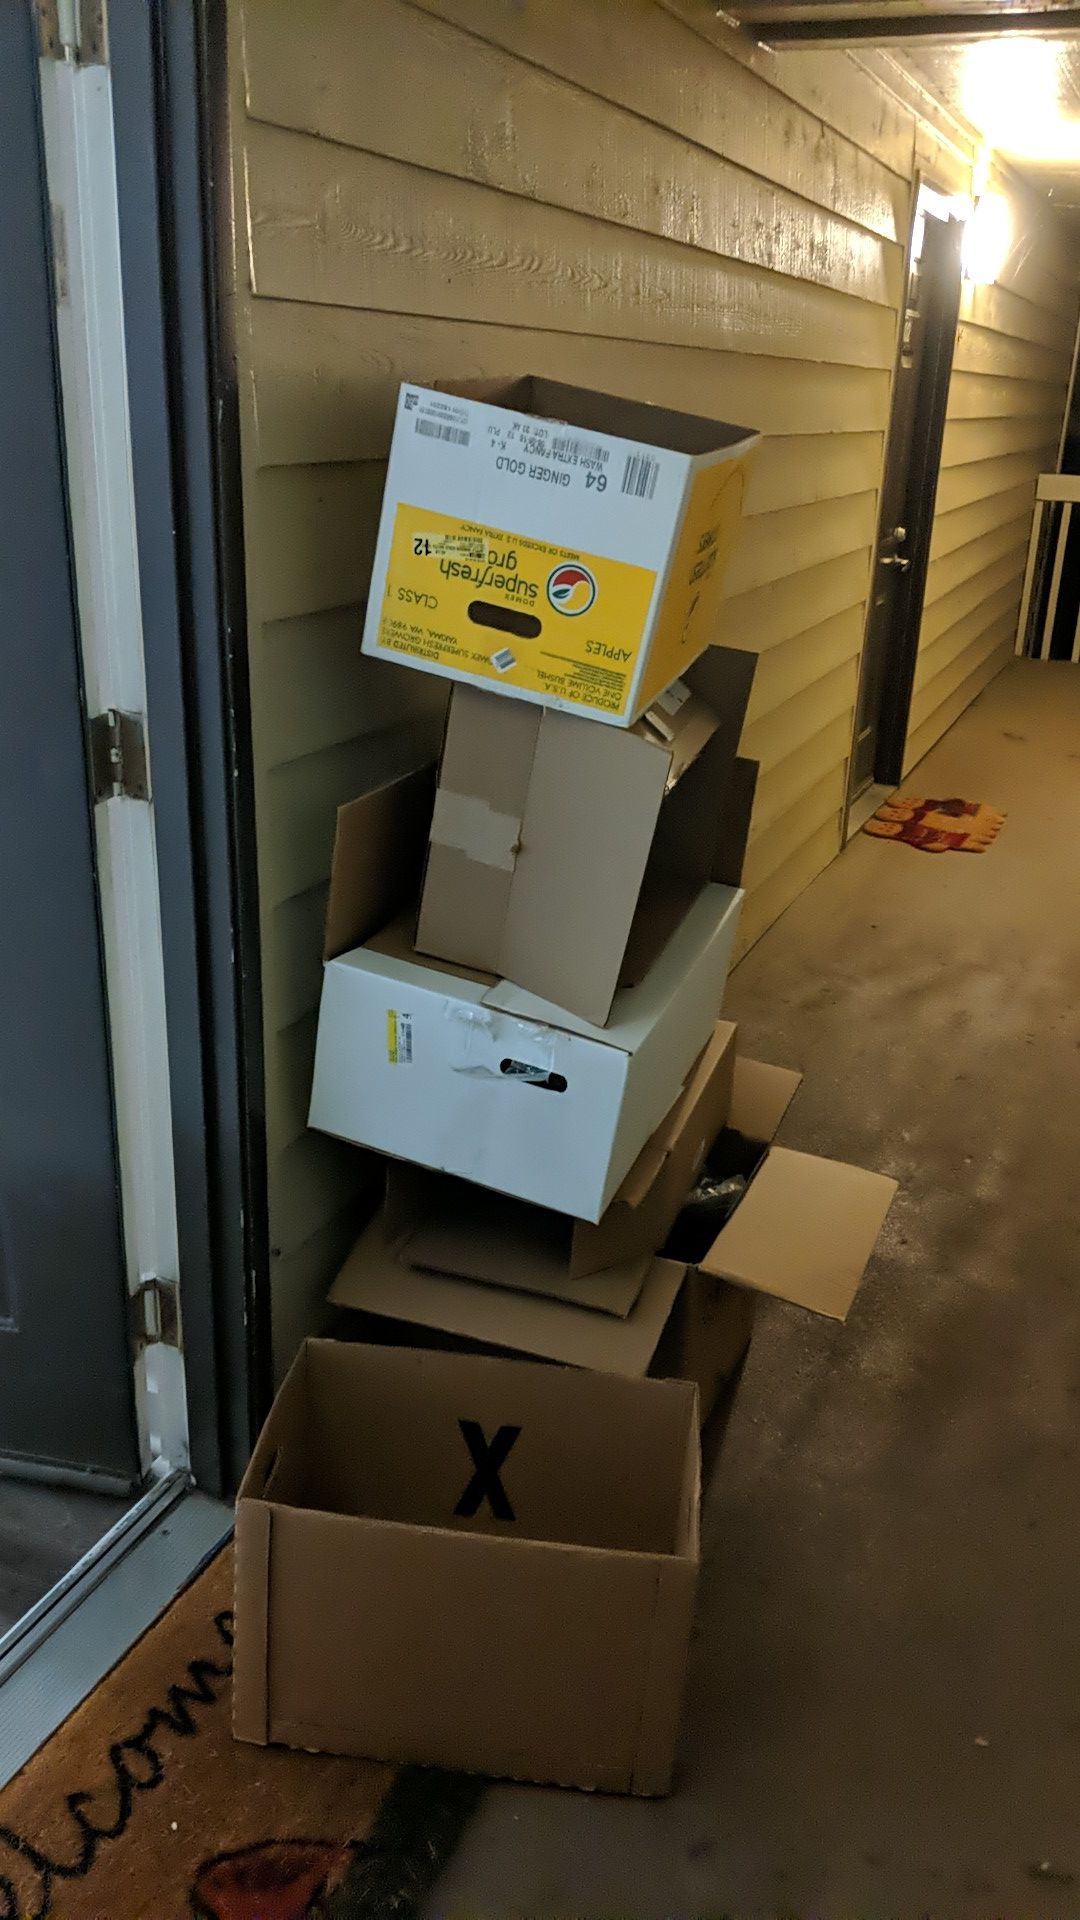 Moving boxes!